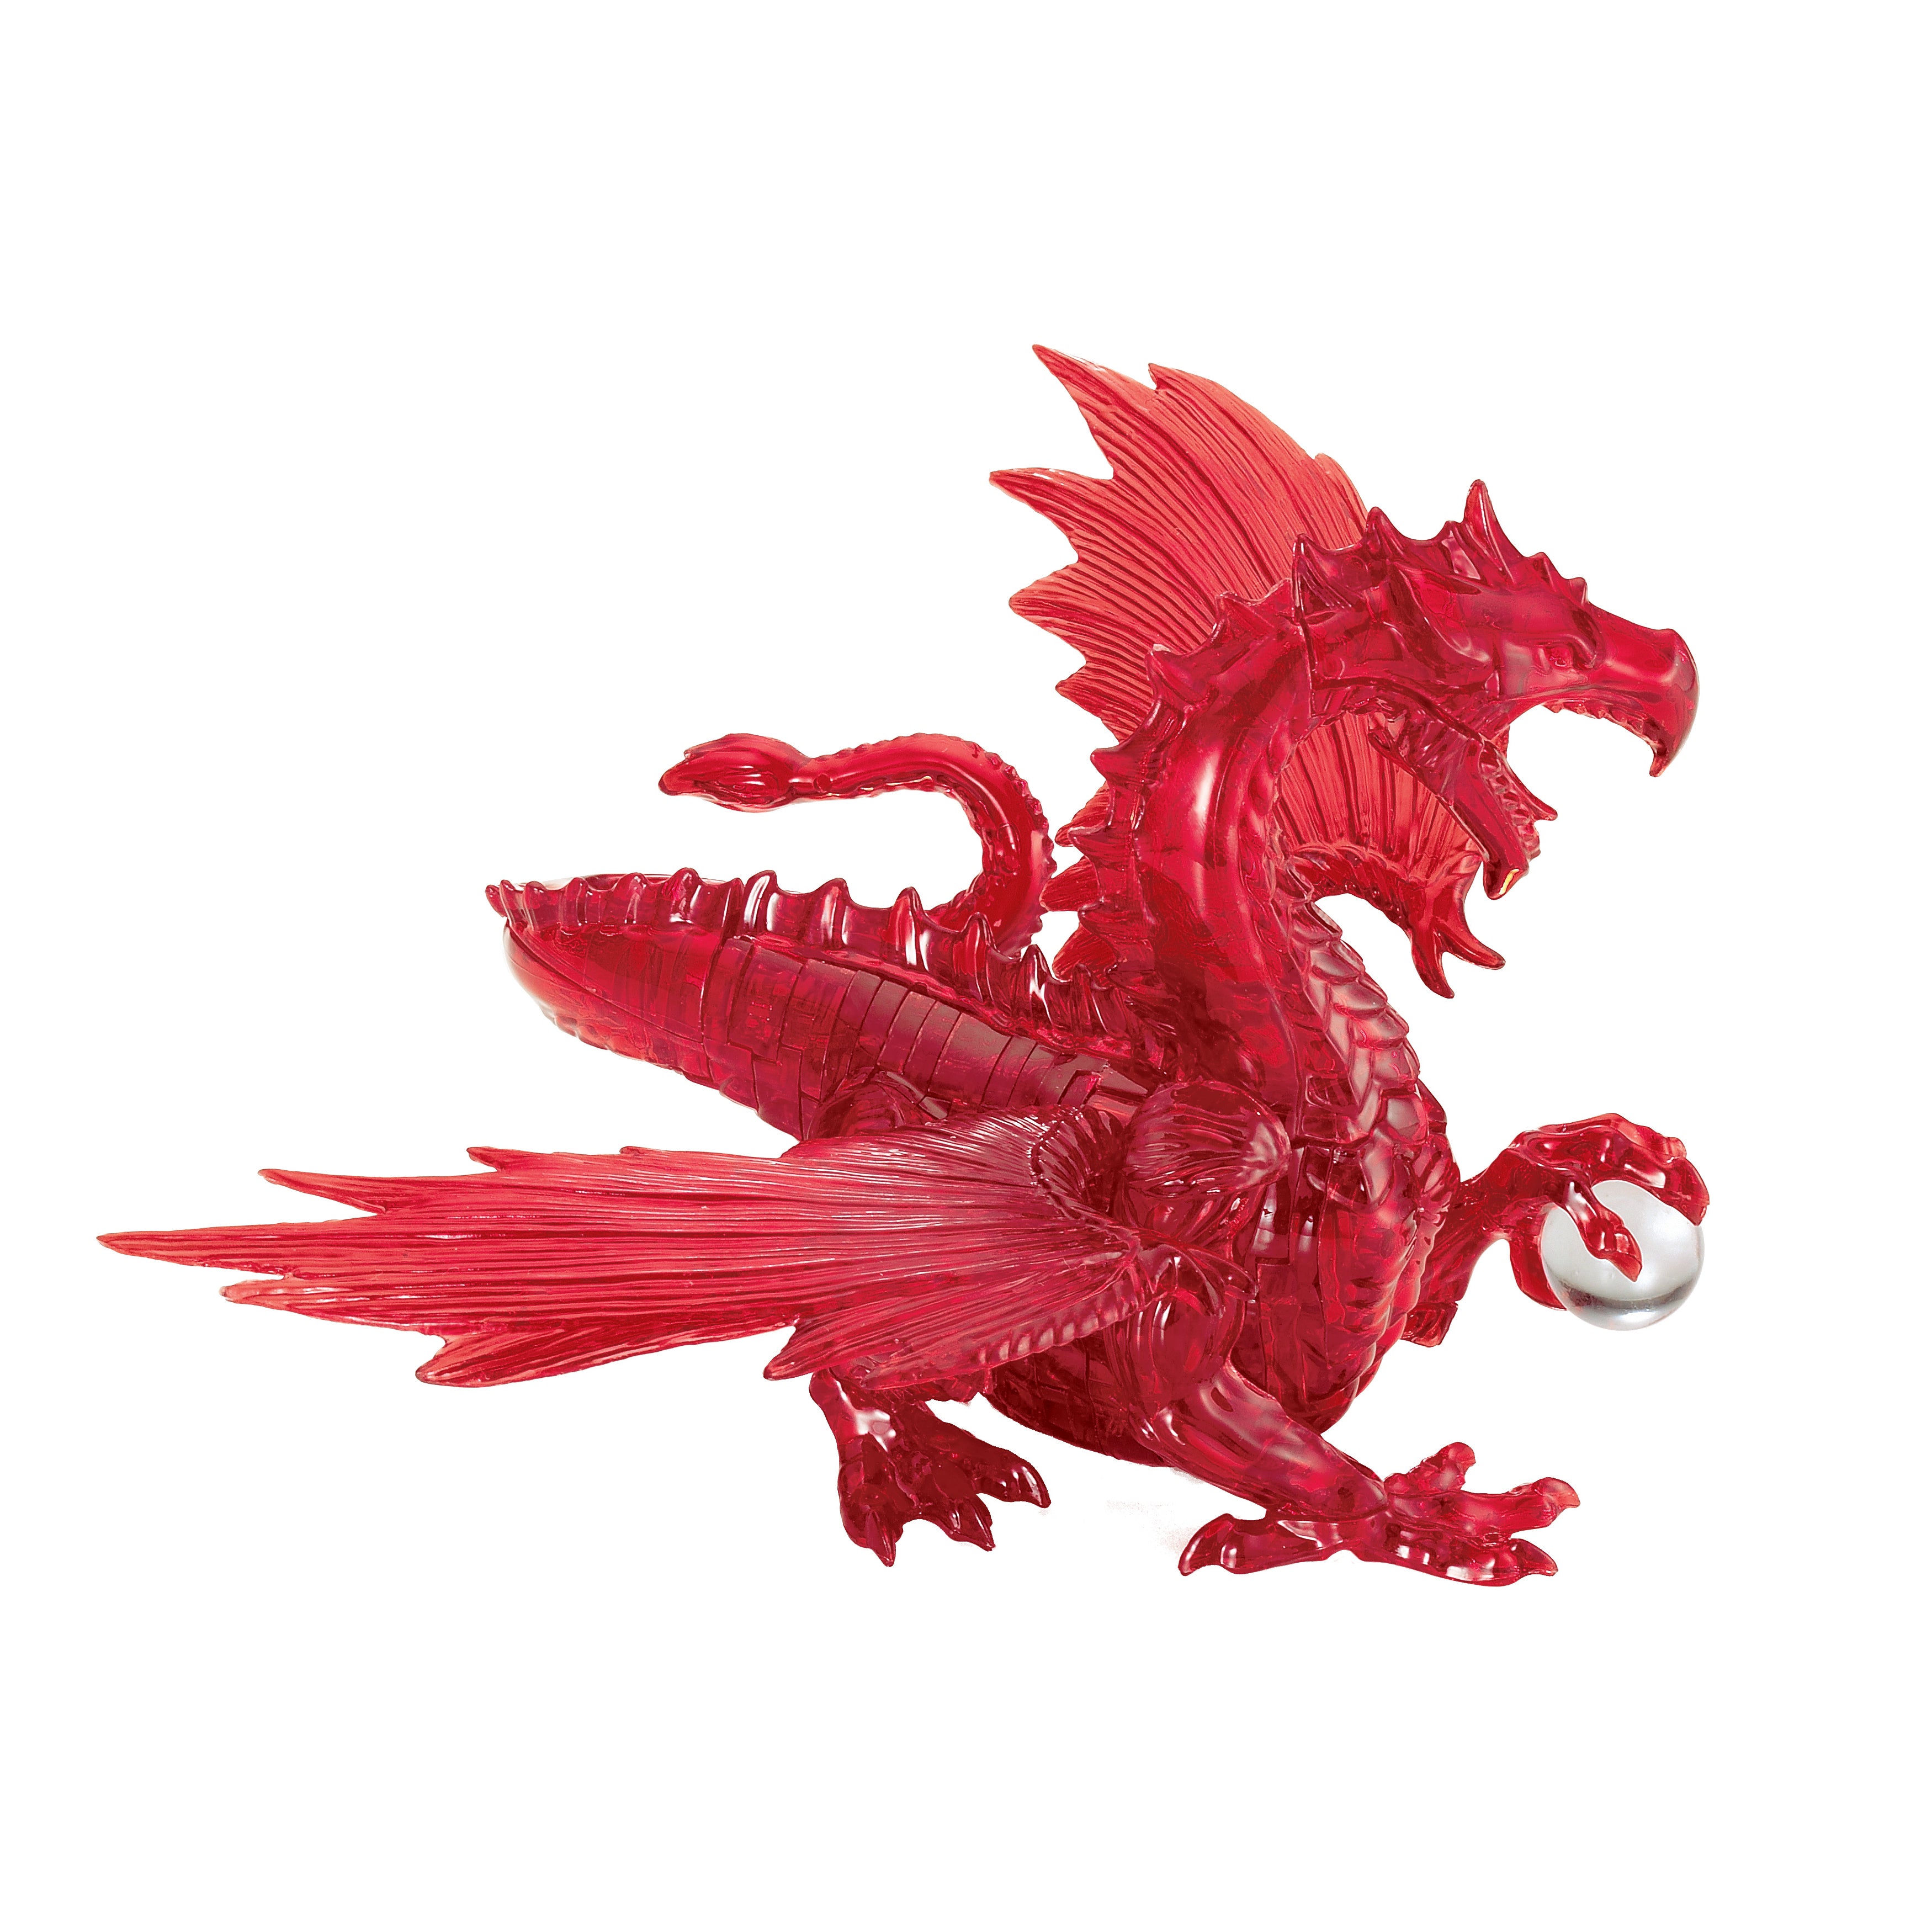 Dragon Original 3D Crystal Puzzle from BePuzzled, Ages 12 and Up